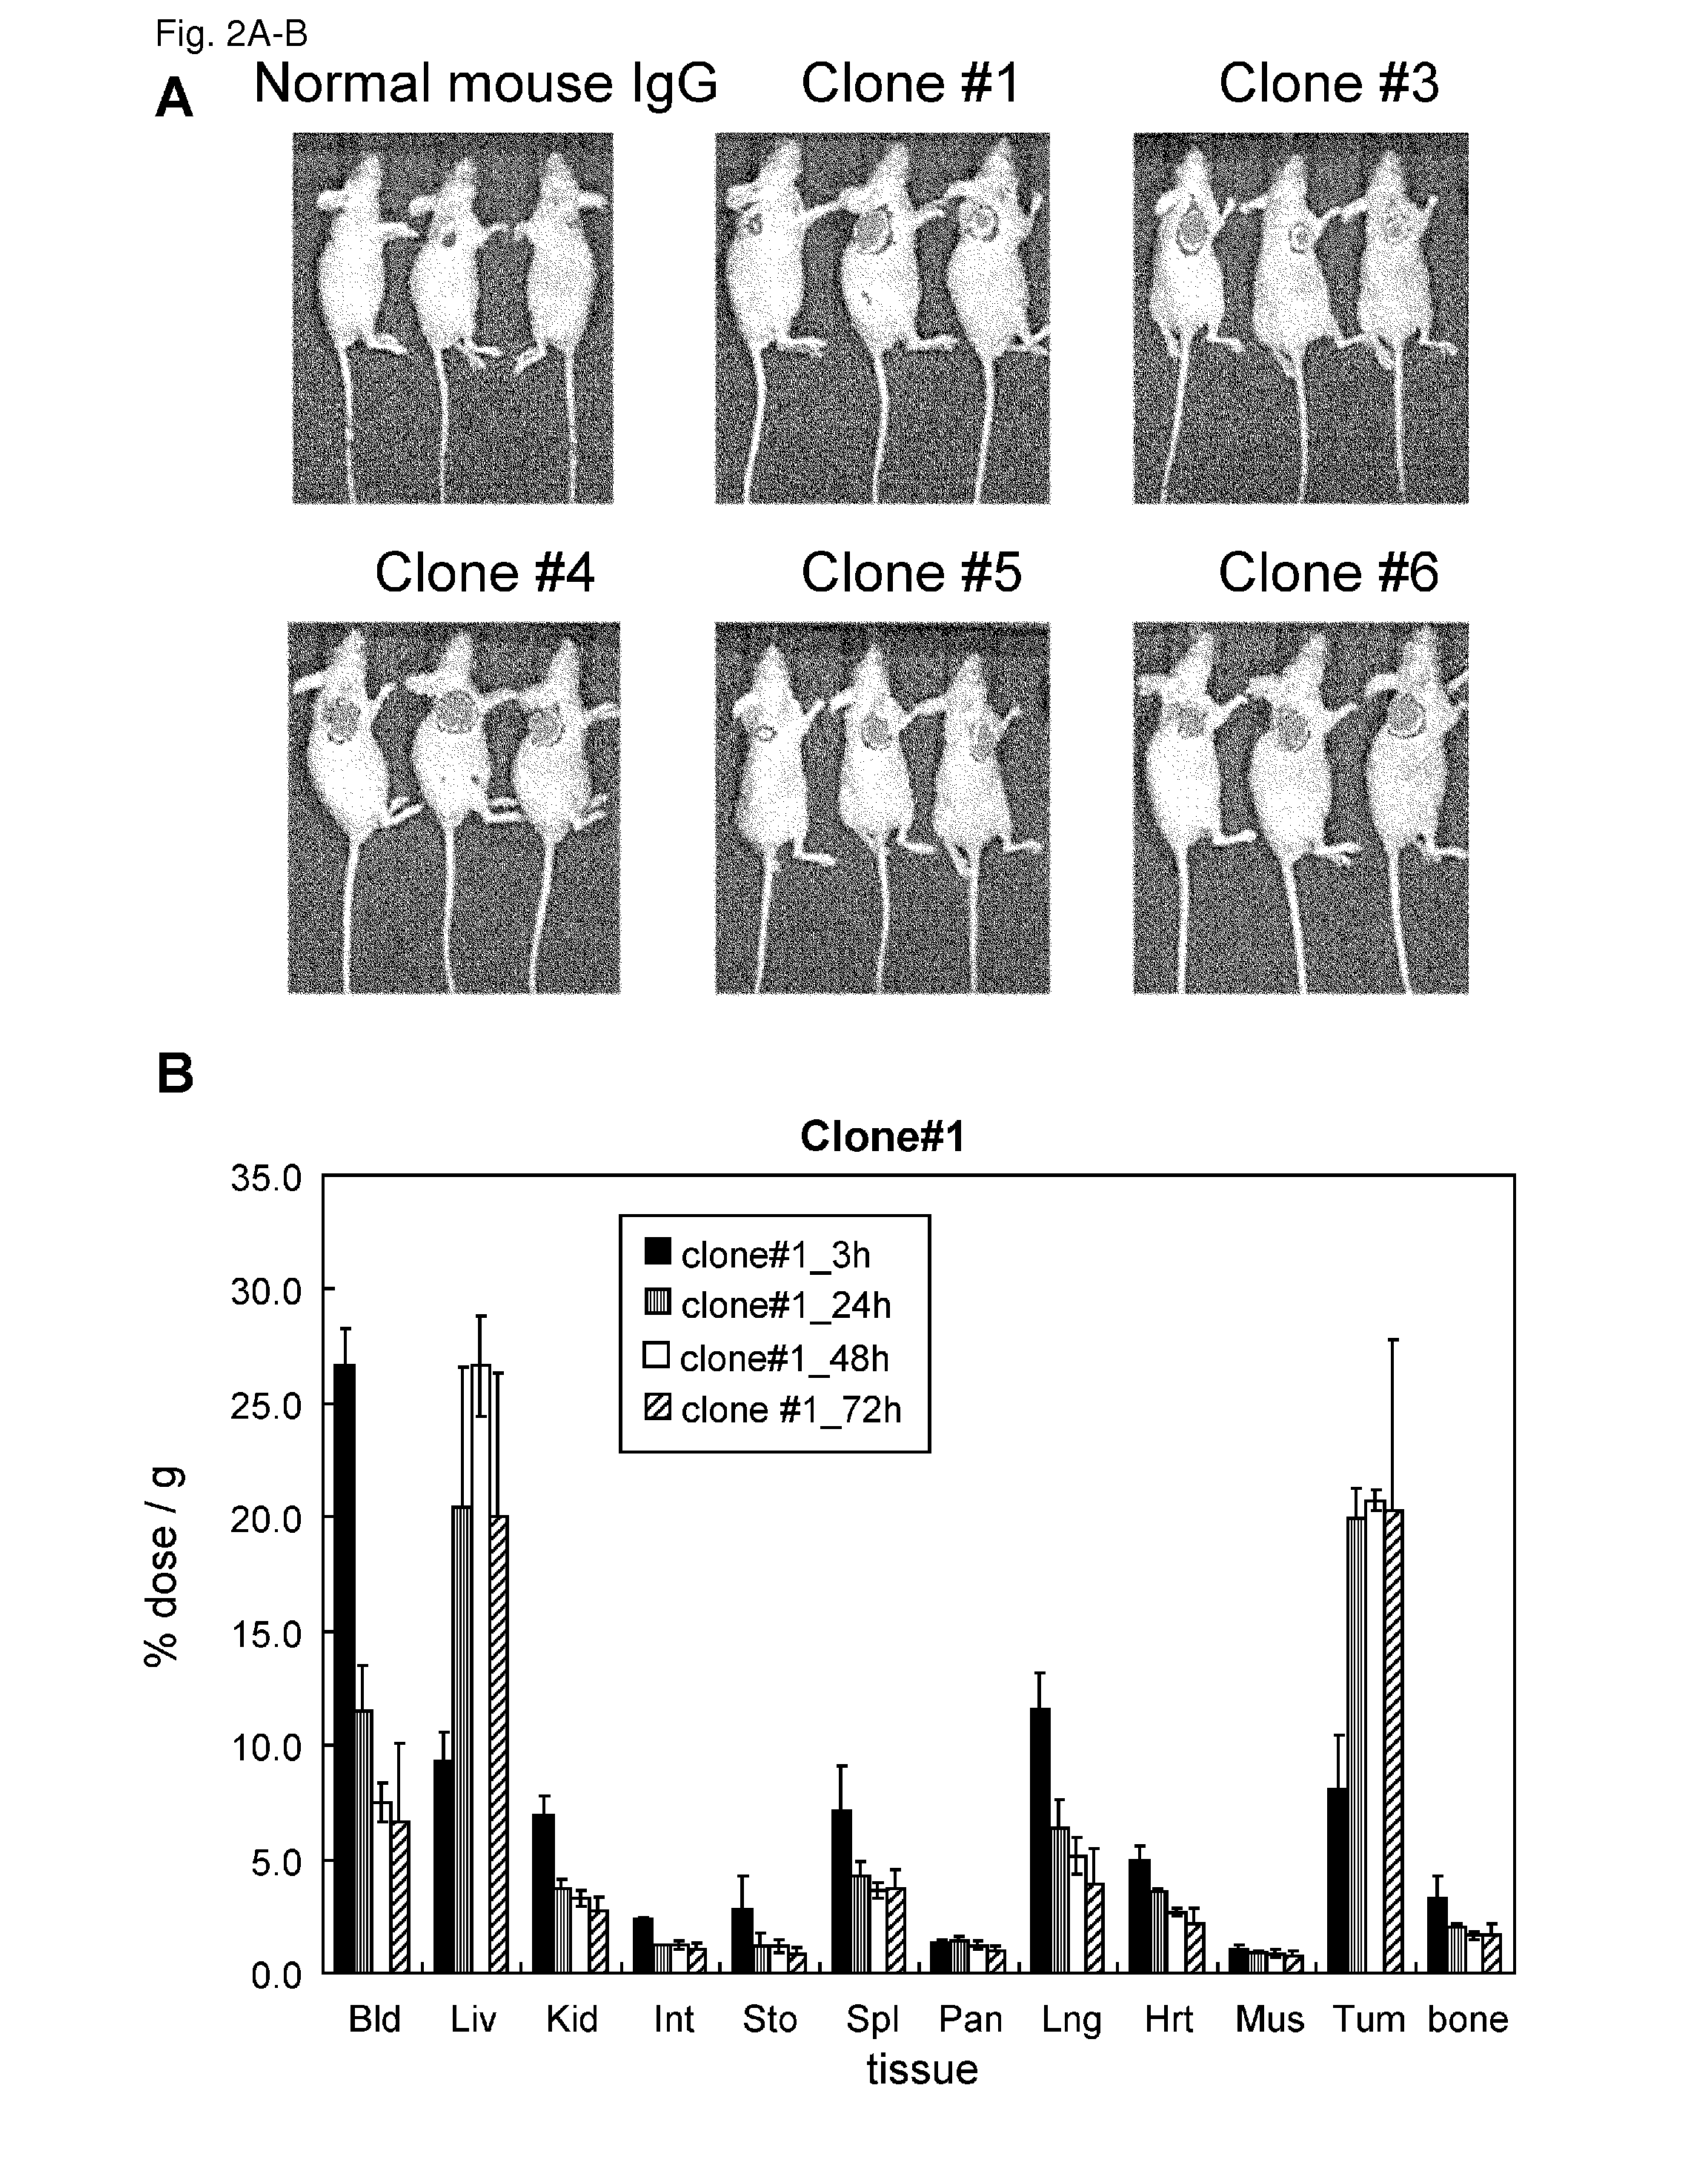 Anti-CDH3 antibodies labeled with radioisotope label and uses thereof